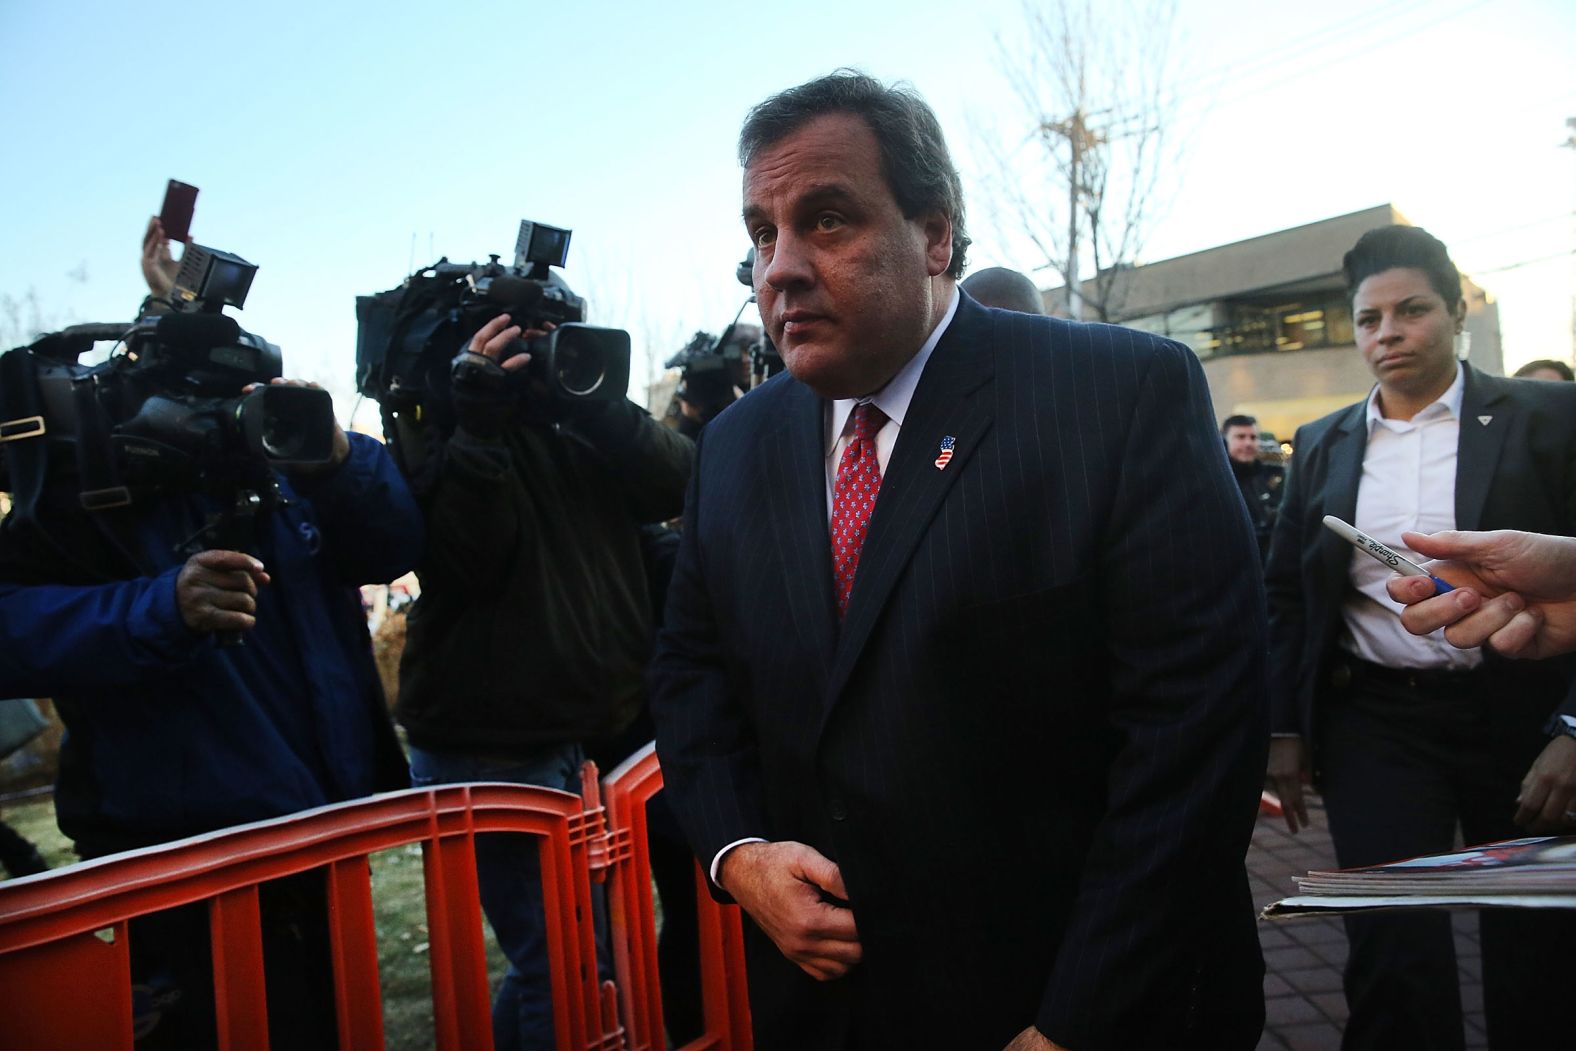 Christie enters the borough hall in Fort Lee, New Jersey, to apologize to Mayor Mark Sokolich in January 2014. Lane closures had snarled traffic for days at the George Washington Bridge, which connects Manhattan to Fort Lee. It was alleged that Christie's deputy chief of staff signaled for the New York and New Jersey Port Authority to close the lanes to punish Sokolich for not endorsing Christie during the election. Christie said he had no knowledge of any plot to close the lanes. He was never charged in the "Bridgegate" scandal, but two former officials linked to his office, including the deputy chief of staff, <a href="index.php?page=&url=http%3A%2F%2Fwww.cnn.com%2F2017%2F03%2F29%2Fus%2Fbridgegate-sentencing%2F" target="_blank">were convicted</a> in 2017 of using their power to close the lanes as an act of political revenge. In 2020, the US Supreme Court <a href="index.php?page=&url=https%3A%2F%2Fwww.cnn.com%2F2020%2F05%2F07%2Fpolitics%2Fsupreme-court-bridgegate-new-jersey-opinion%2Findex.html" target="_blank">threw out the fraud convictions</a>.